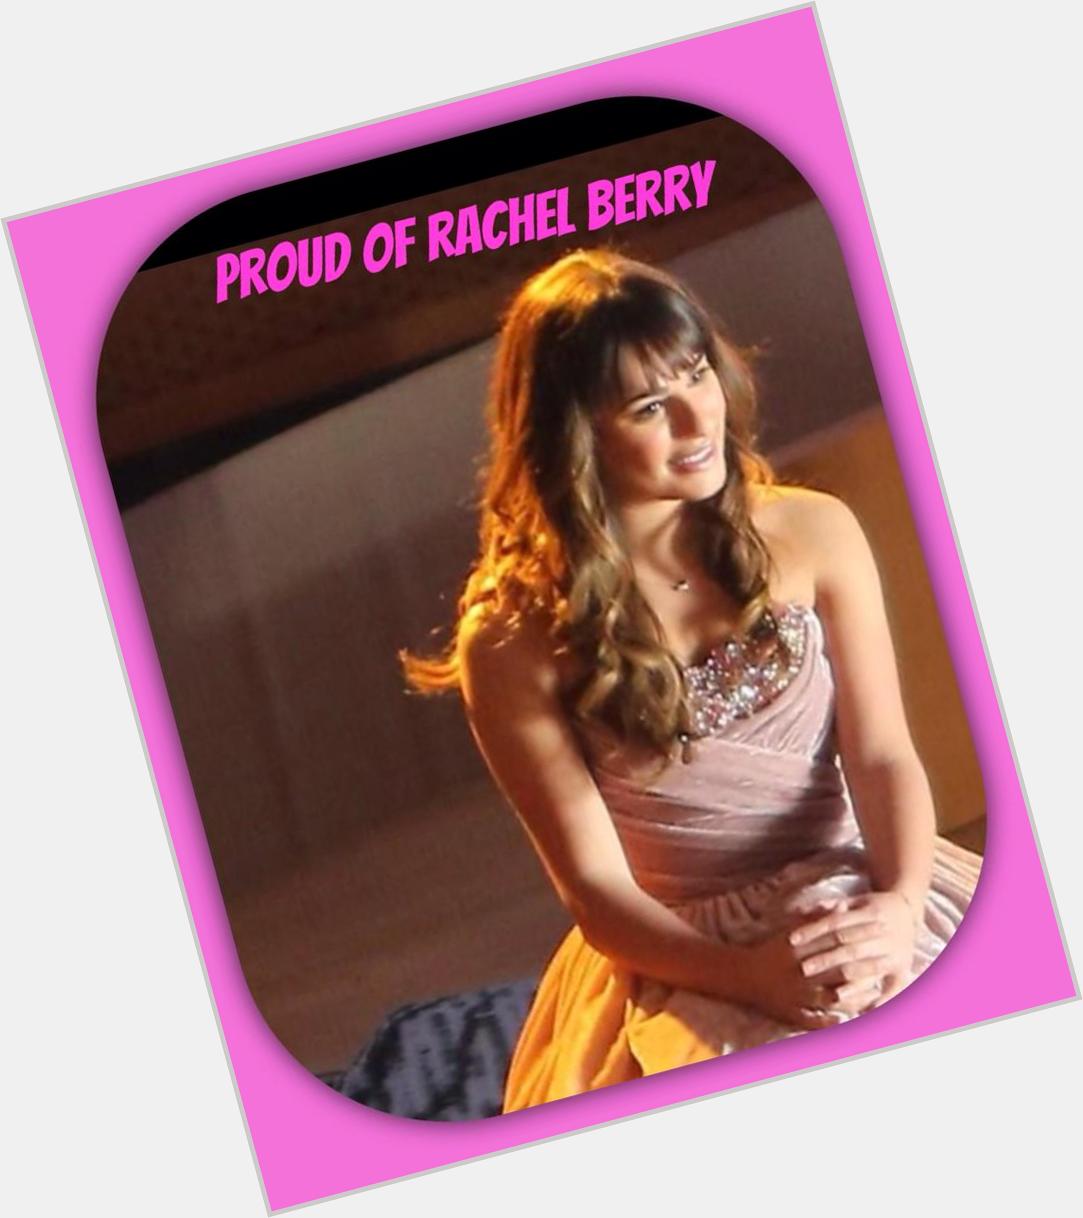 Happy Birthday To Our Star Rachel Berry   Sorry, i am off to bed. Feeling sick 